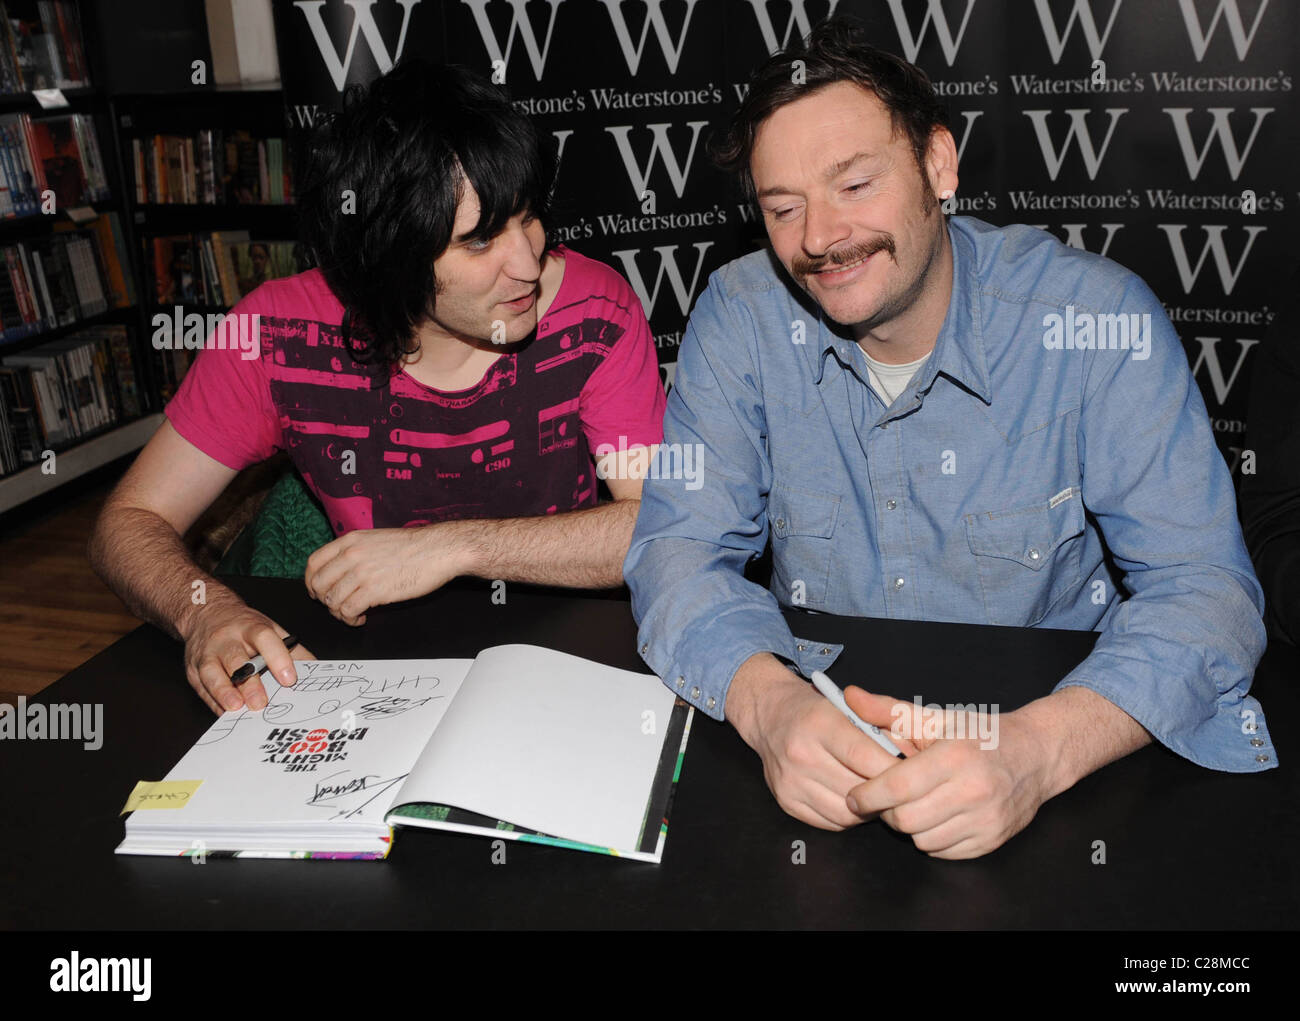 Noel Fielding and Julian Barratt of The Mighty Boosh at a booksigning at Waterstone's, Piccadilly, London, England - 05.12.09 Stock Photo